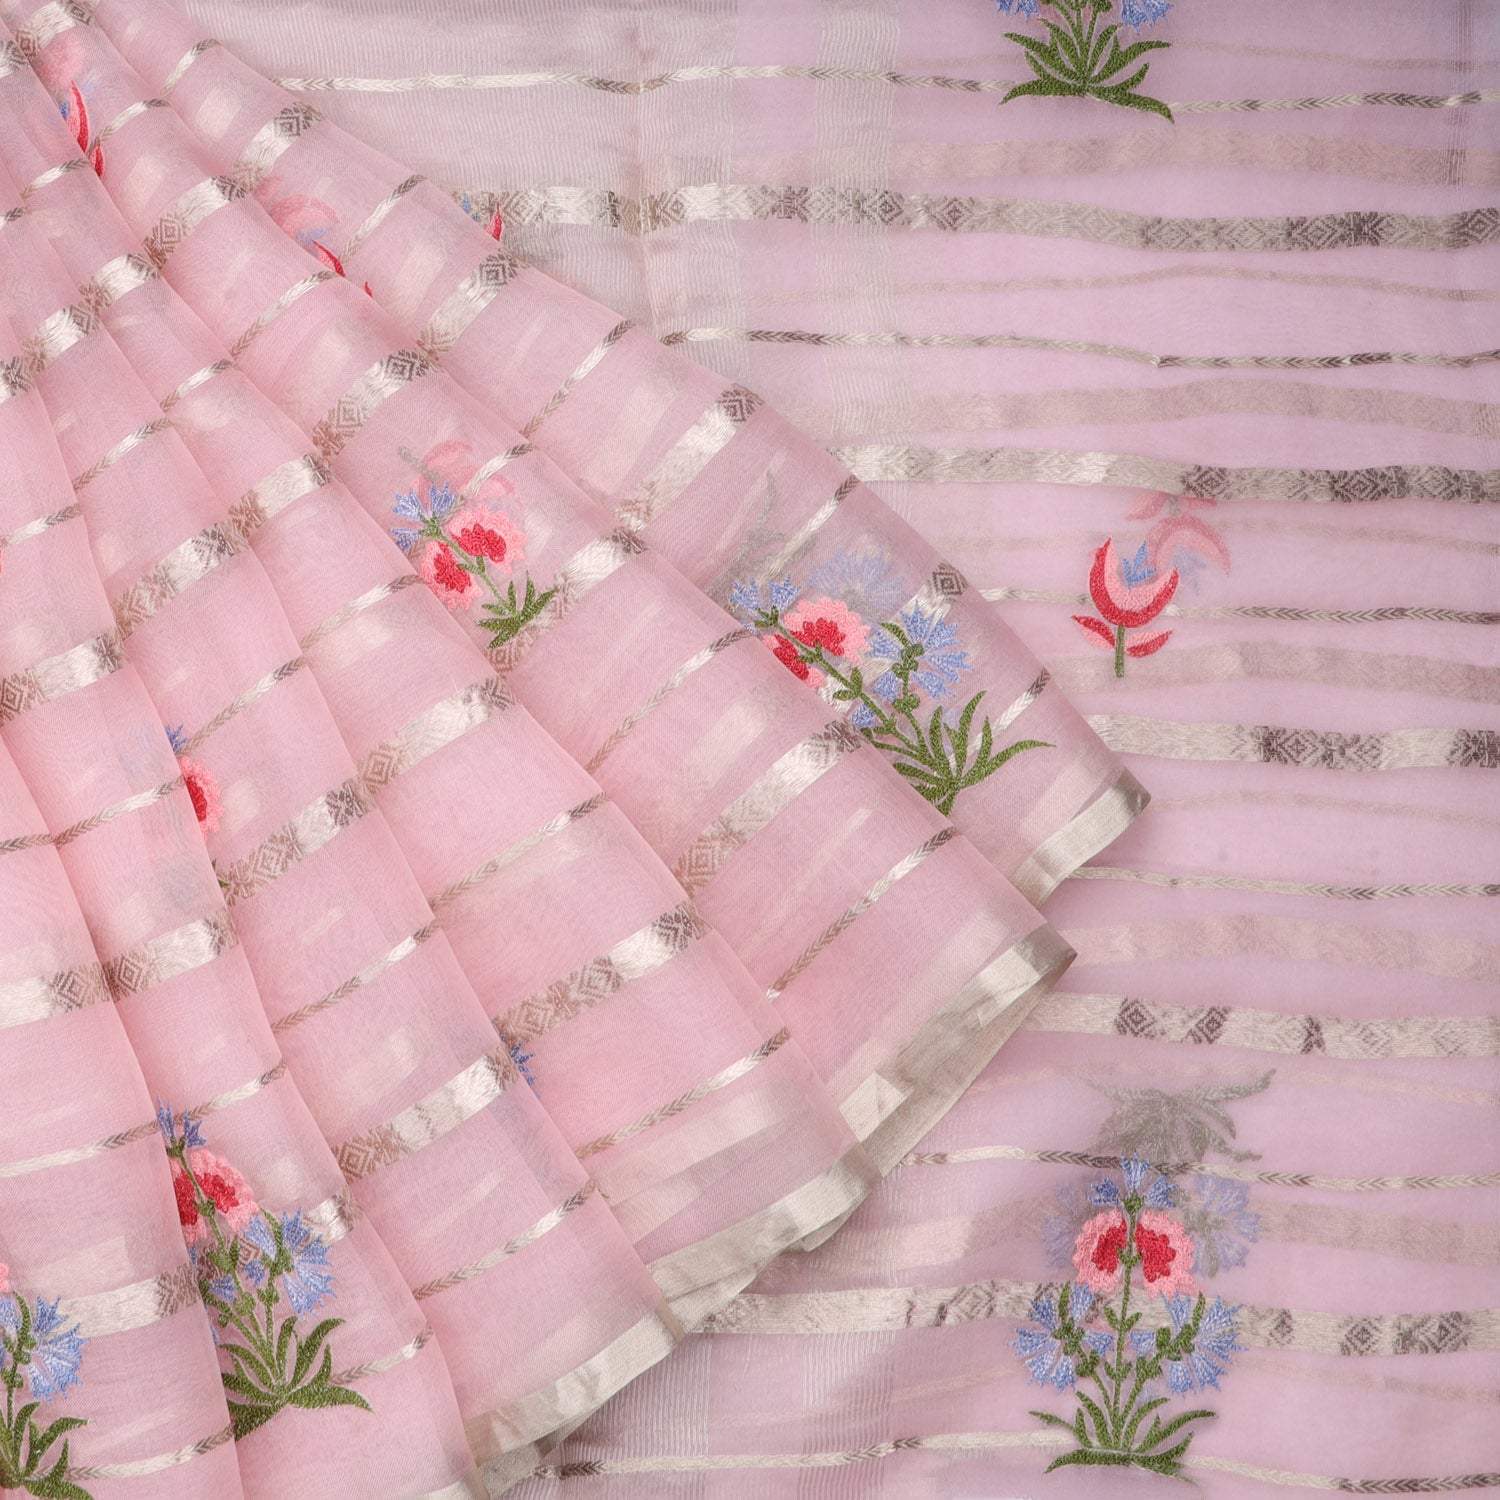 Baby Pink Organza Saree With Floral Embroidery - Singhania's